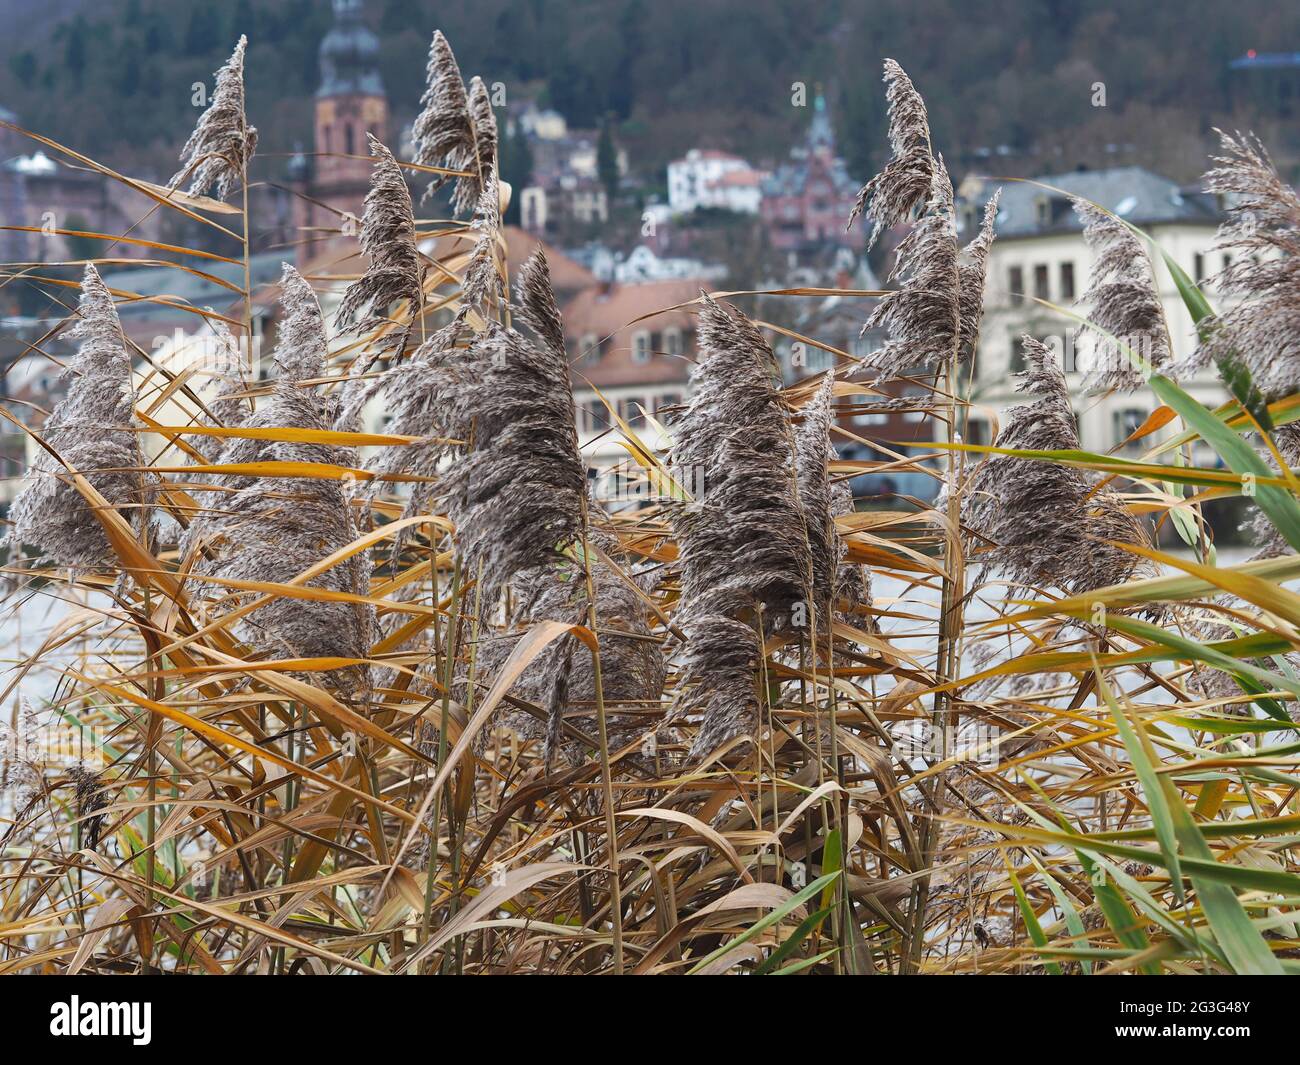 Reeds at the bank of river Neckar during winter in Heidelberg, Germany. Out of focus old town is visible in the background. Stock Photo